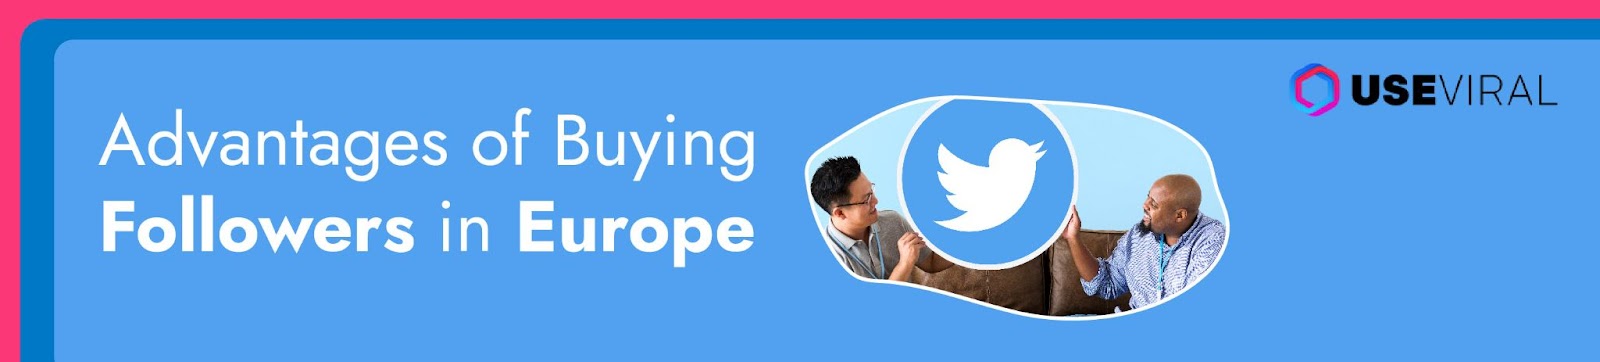 Advantages of Buying Followers in Europe